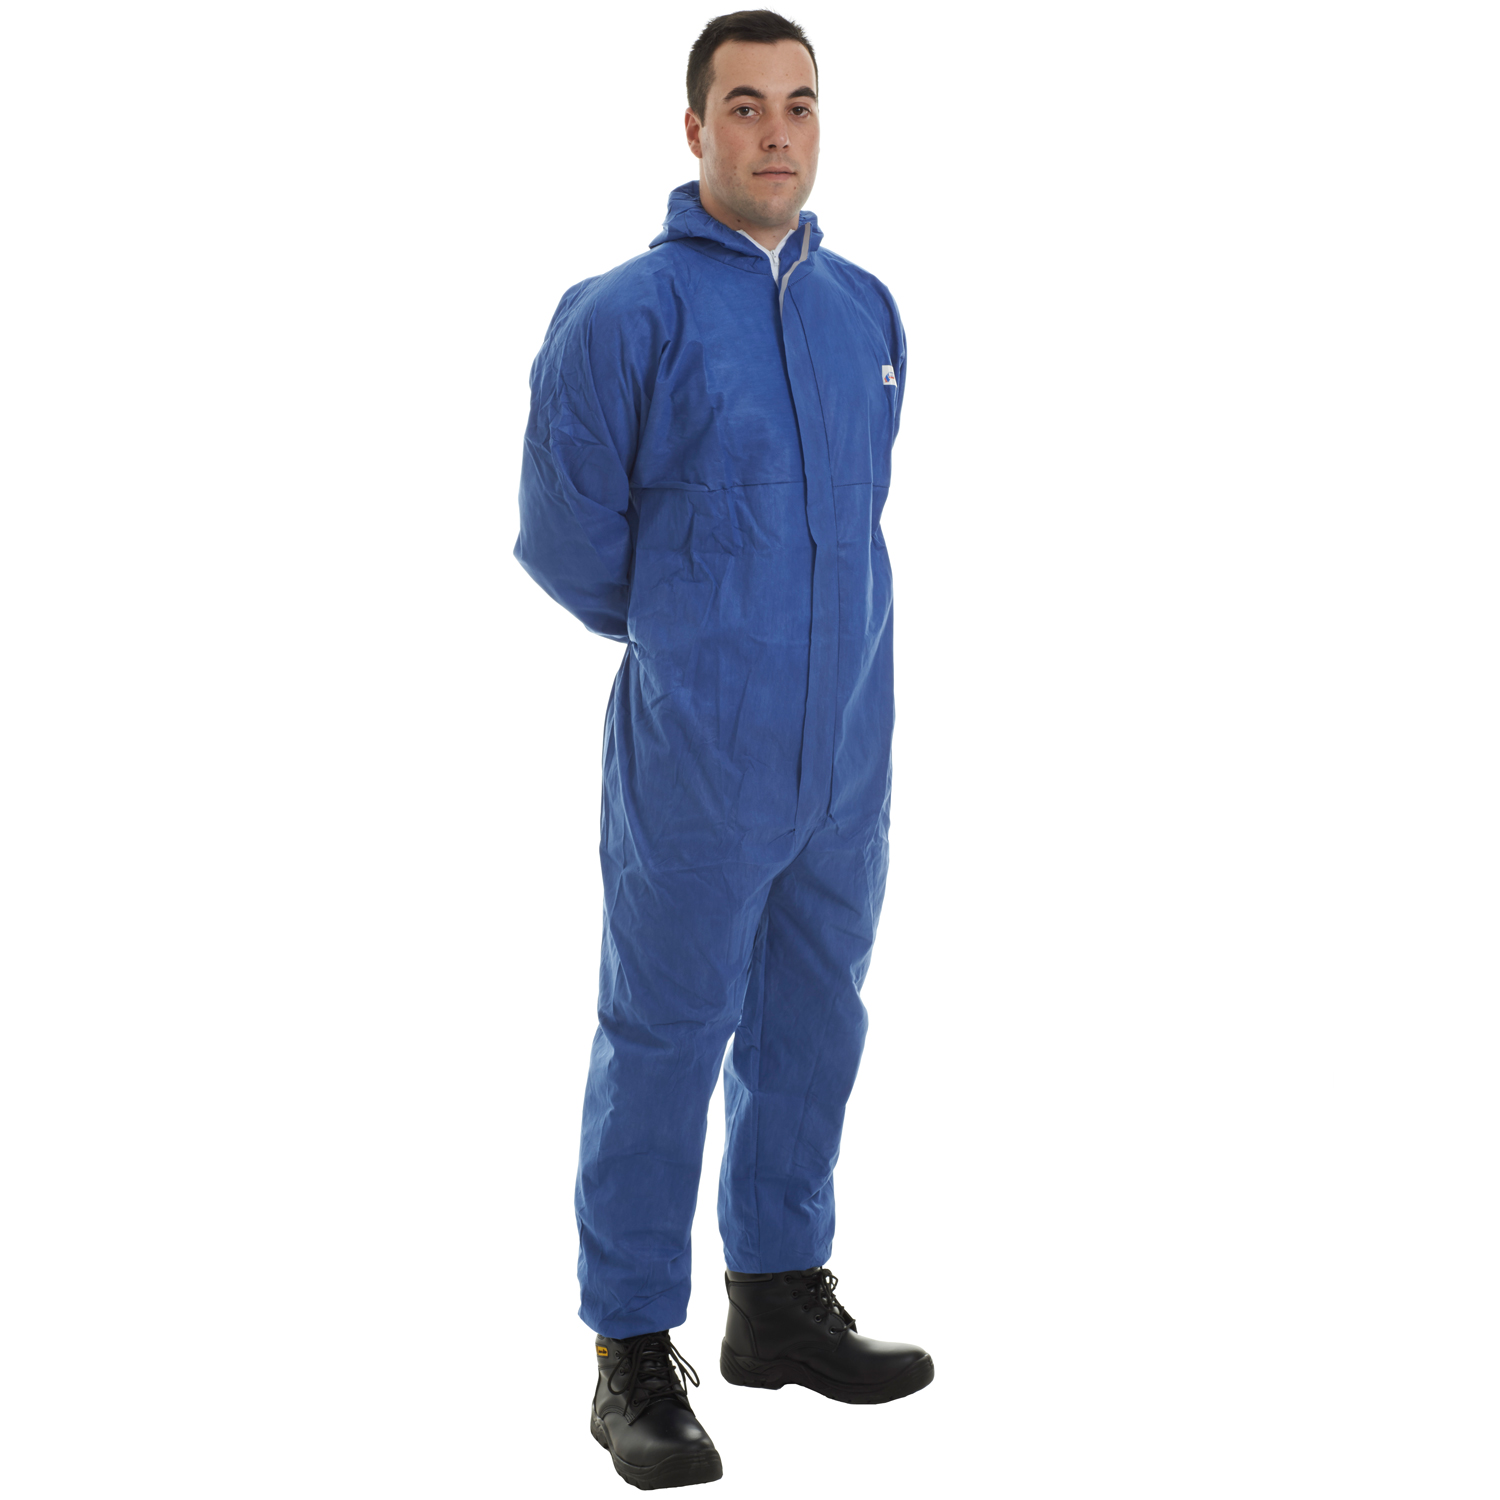 Supertex SMS Disposable Coverall Blue - Large 